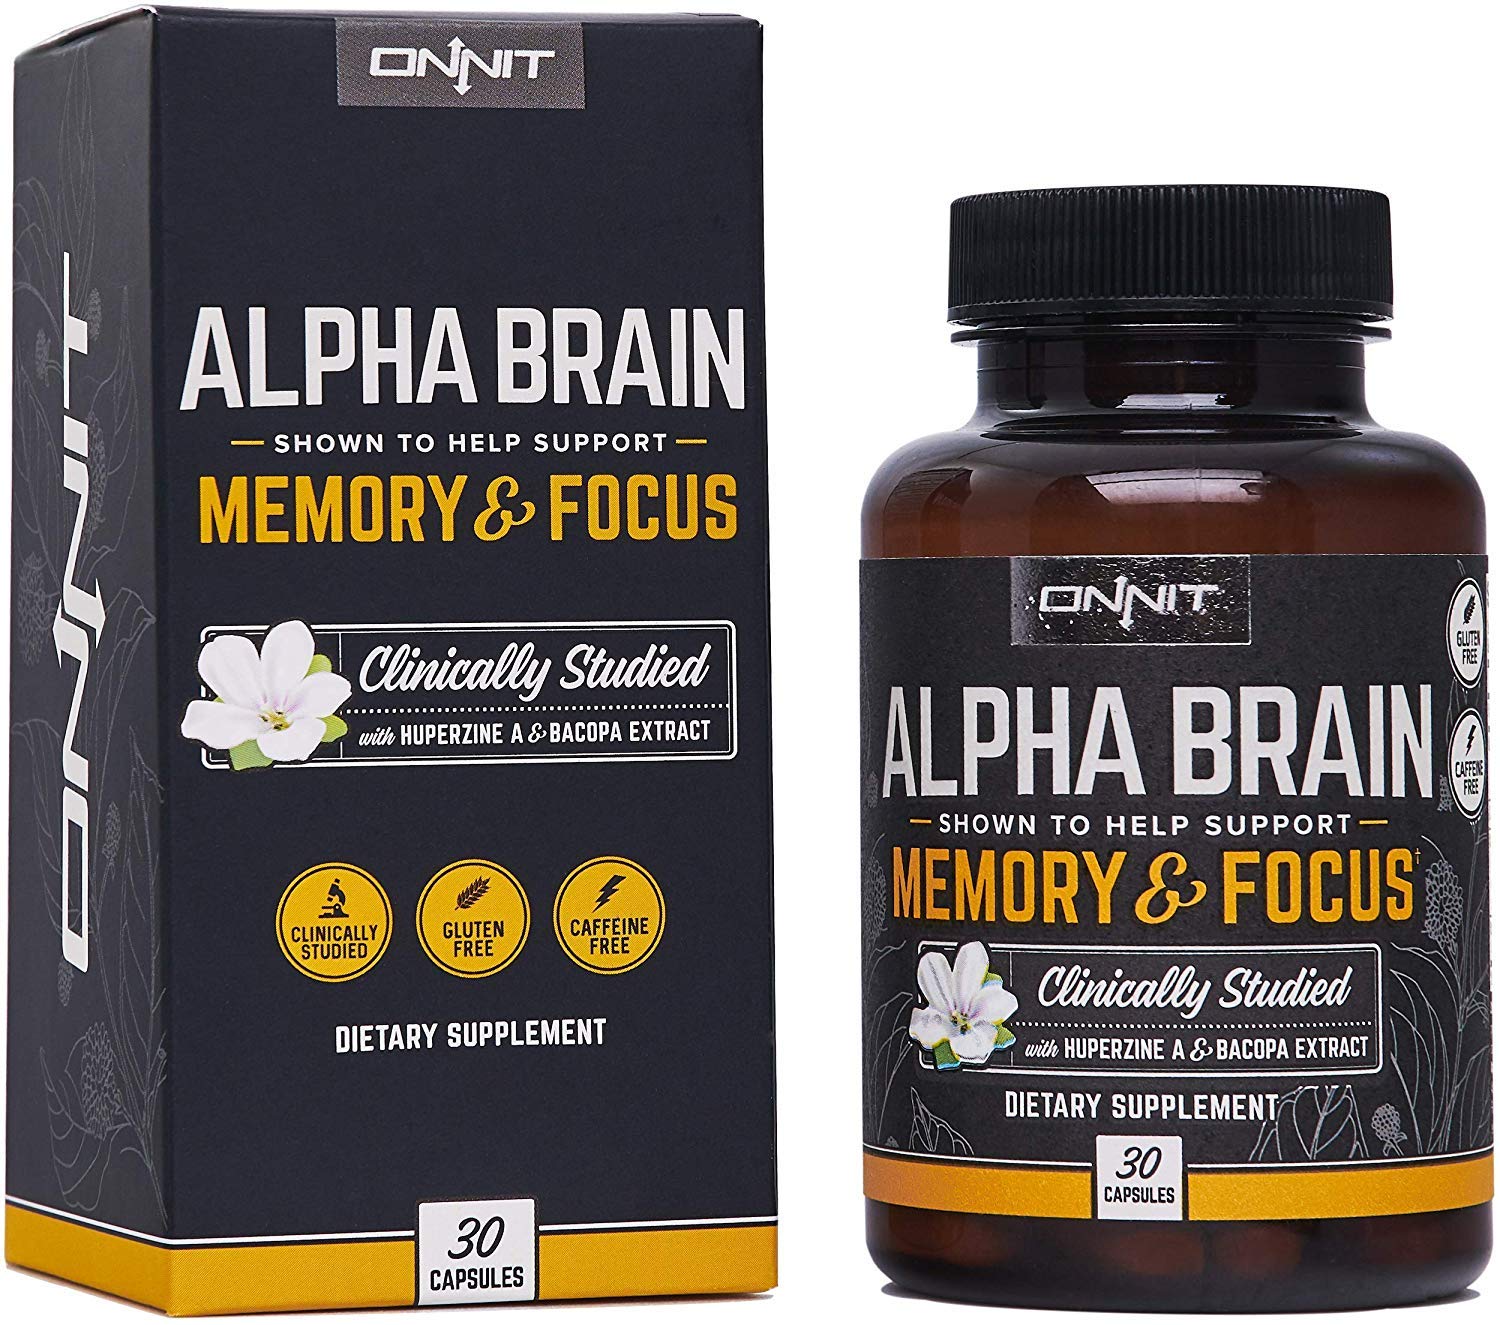 Onnit Alpha Brain (30ct) Nootropic Brain Booster Supplement For Memory, Focus, and Mental Clarity with Bacopa, AC11, Huperzine A, L-Tyrosine, and Vitamin B6